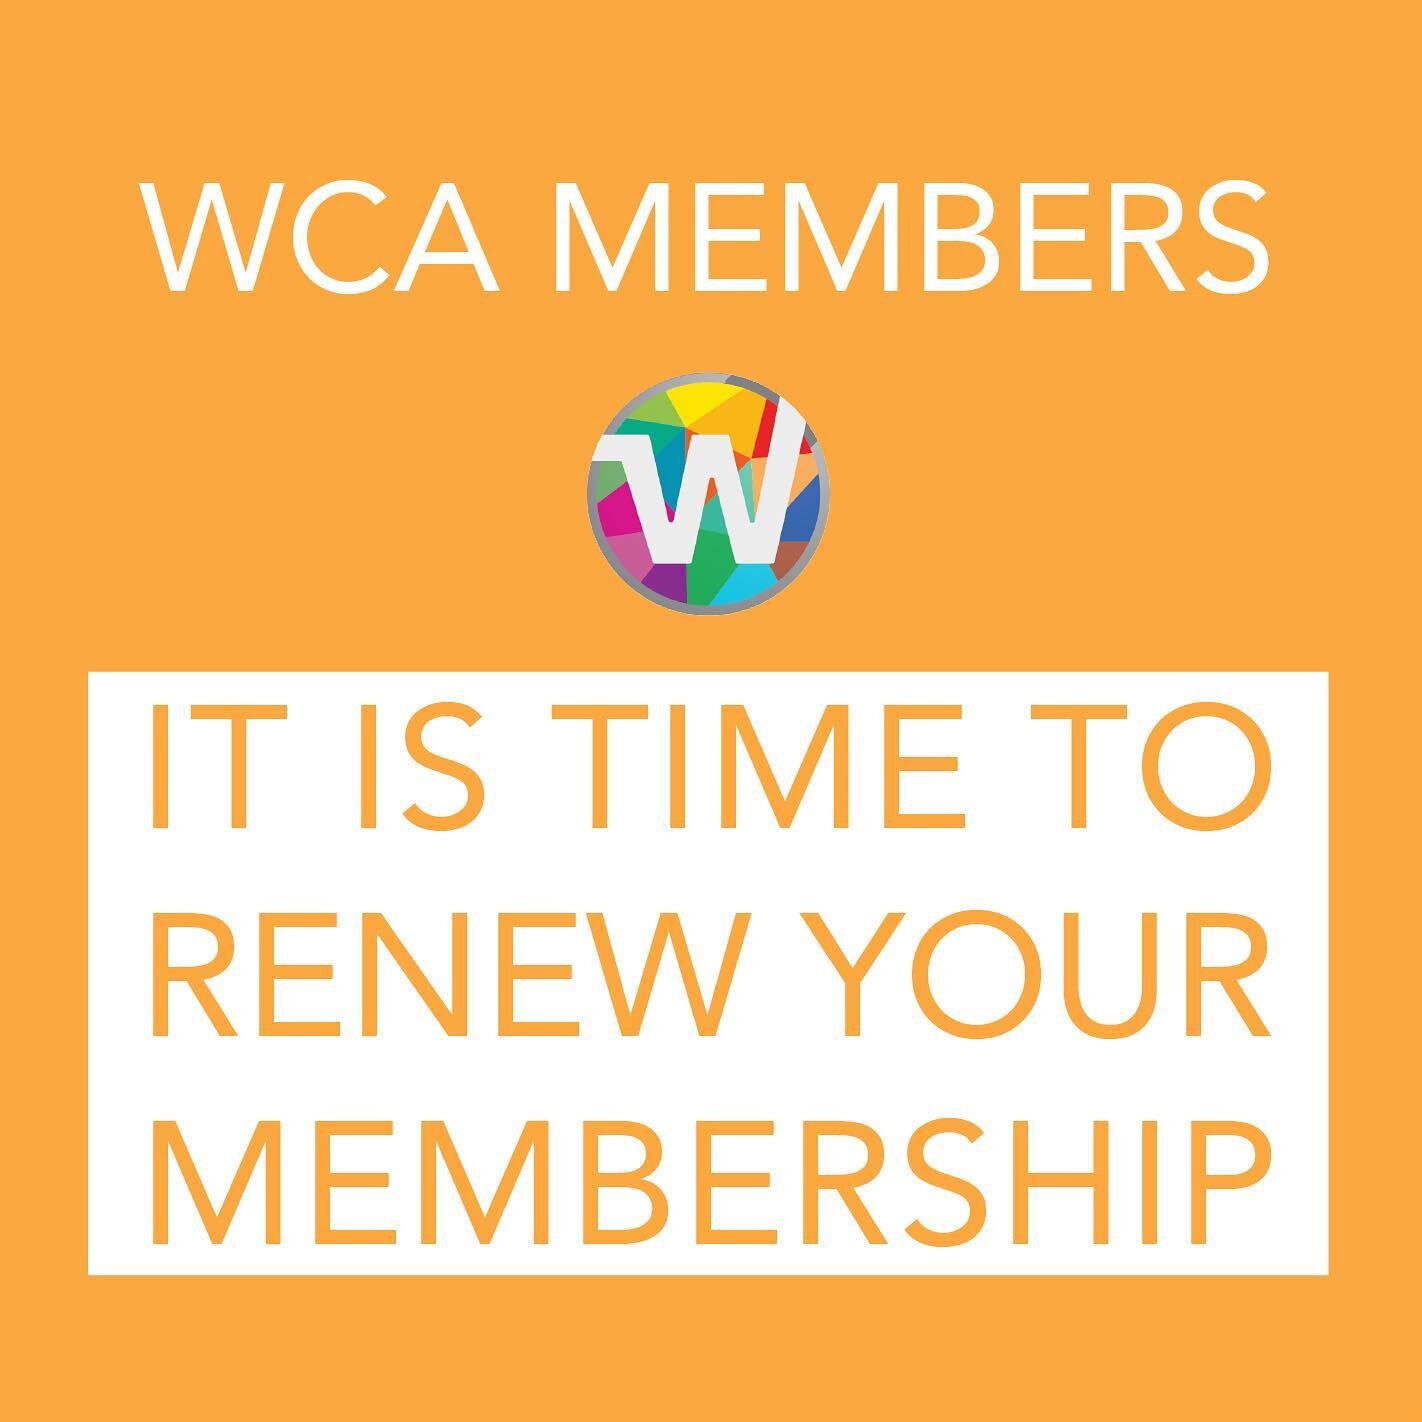 Happy Monday WCA Members! It&rsquo;s time to renew your membership. 

Link in bio to renew or visit https://nationalwca.org/applicants/application.php

#WomensCaucusforArt